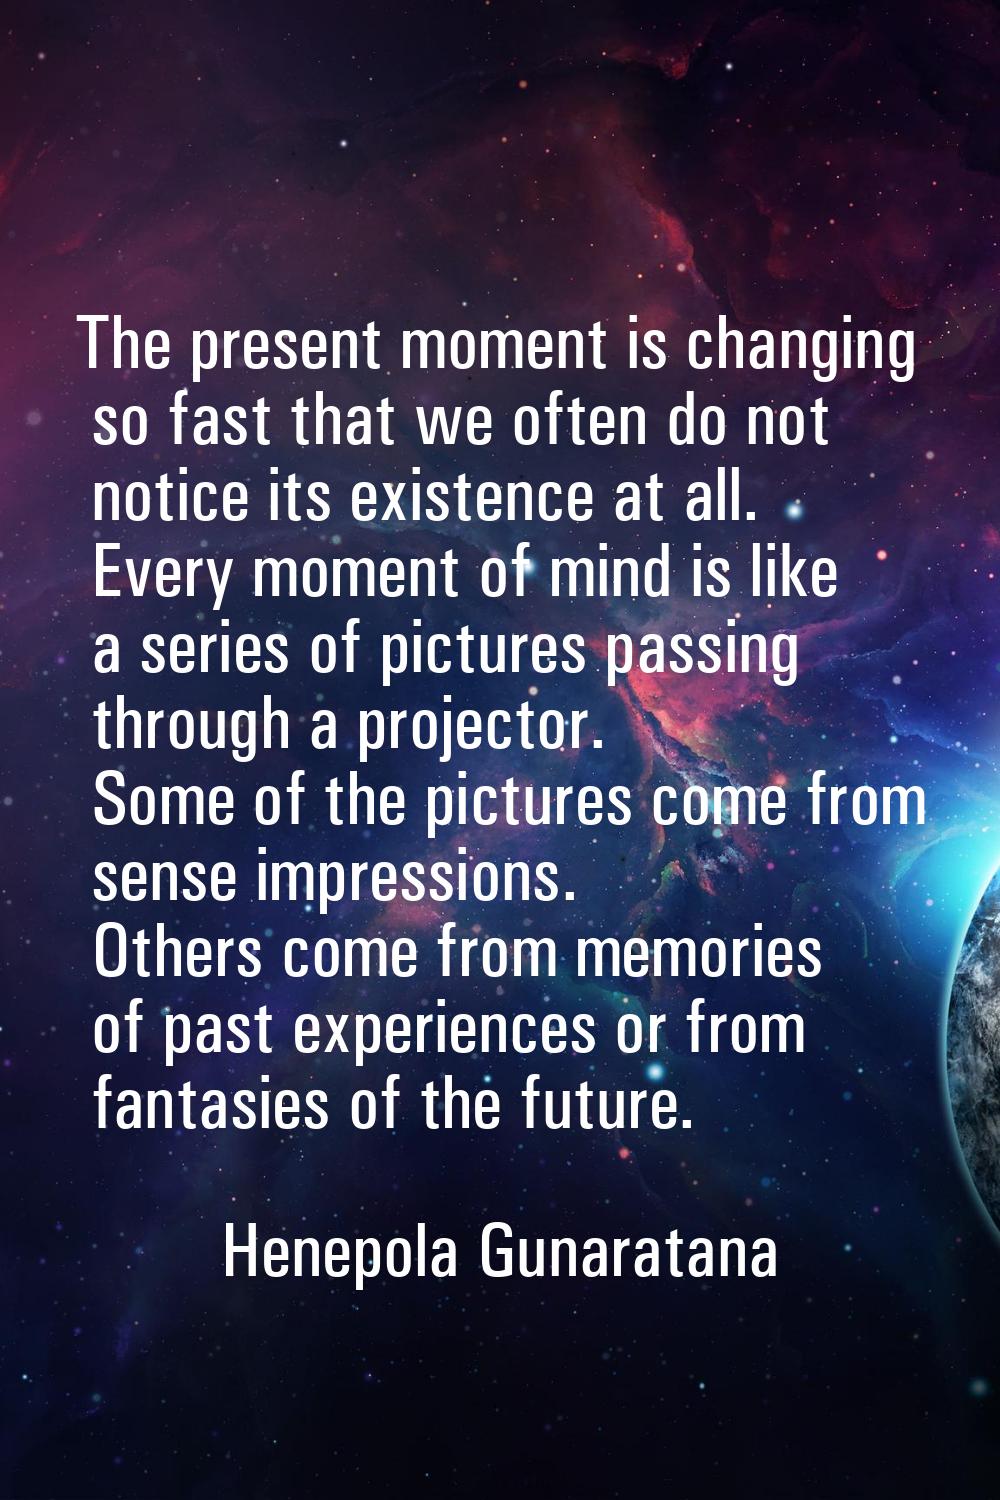 The present moment is changing so fast that we often do not notice its existence at all. Every mome